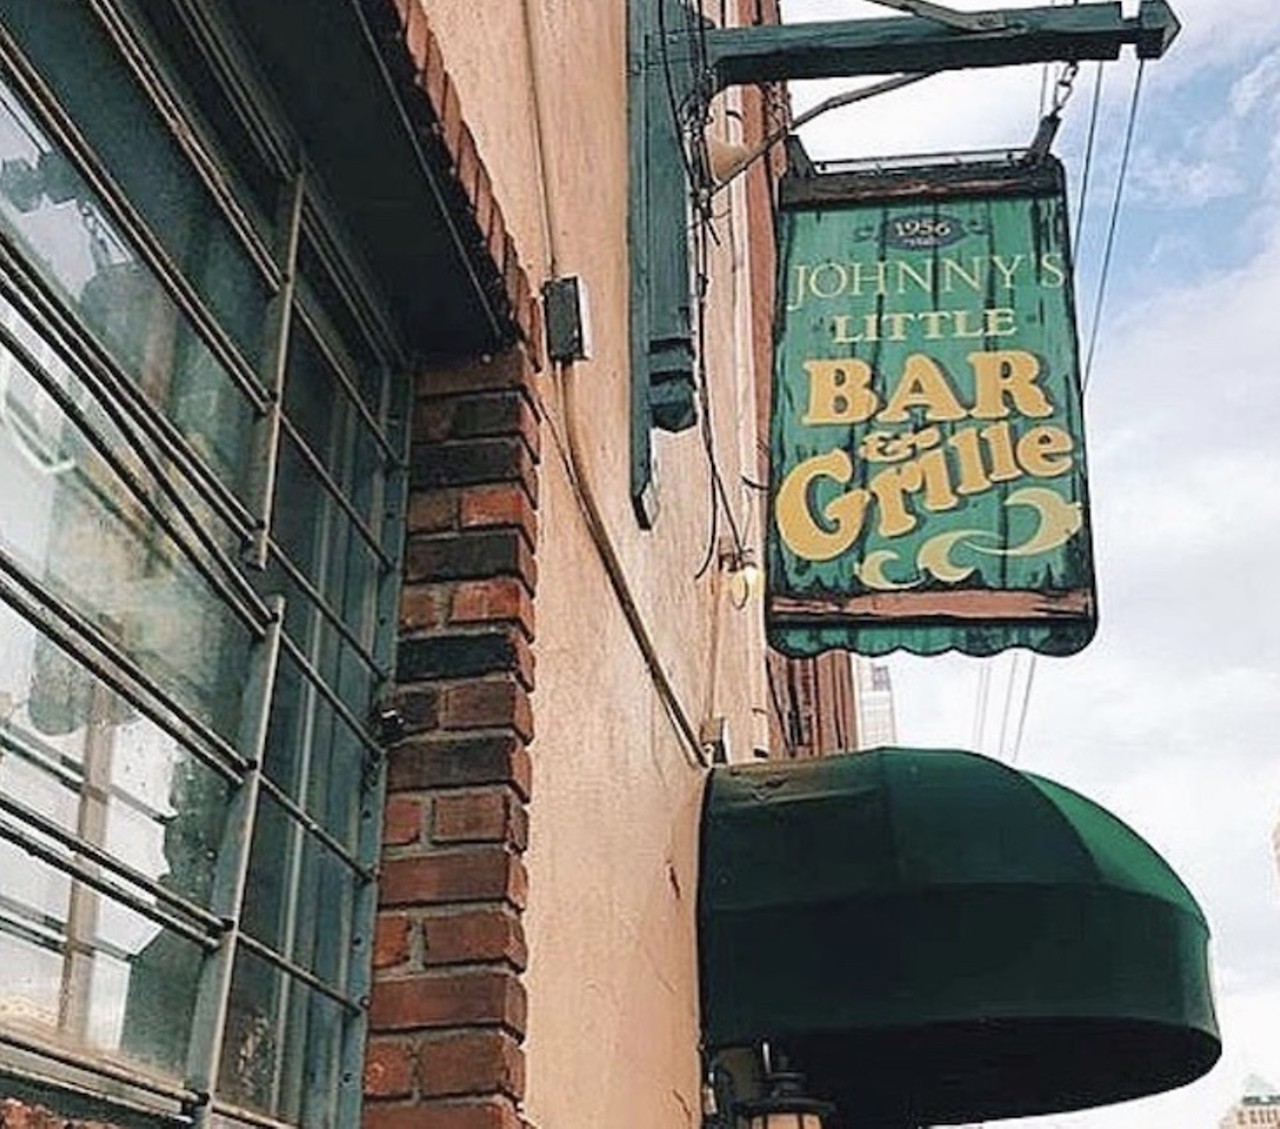 Johnny&#146;s Little Bar
614 Frankfort Ave, Cleveland
If you&#146;re tired of your current sports bar, Johnny&#146;s invites you to watch the Browns&#146; game tucked away in an alley off of West 6th St. This is possisbly the closest thing Cleveland has to the bar from Cheers.
Photo via rchillman/Instagram